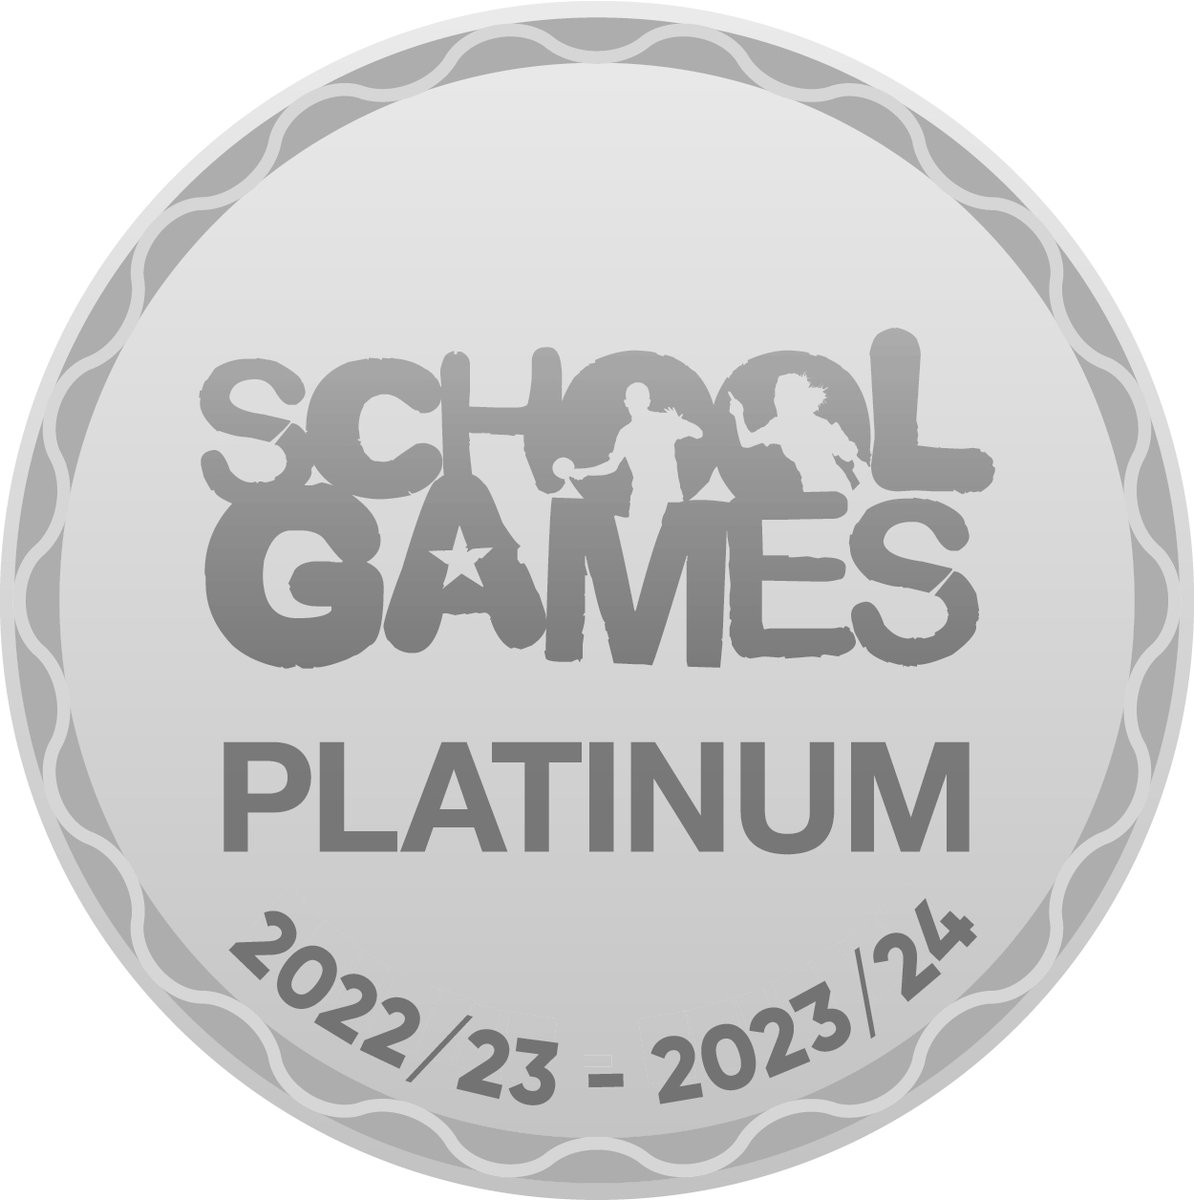 SCHOOL GAMES MARK🏅 

Congratulations to @EdgeHillAPE on achieving the PLATINUM @YourSchoolGames Mark.

Well done to you and Mr Carvell on your amazing achievement. Your dedication and commitment is fantastic, we are so proud of you!

#SchoolGames #WeLovePE @StaffsSG @FierteTrust